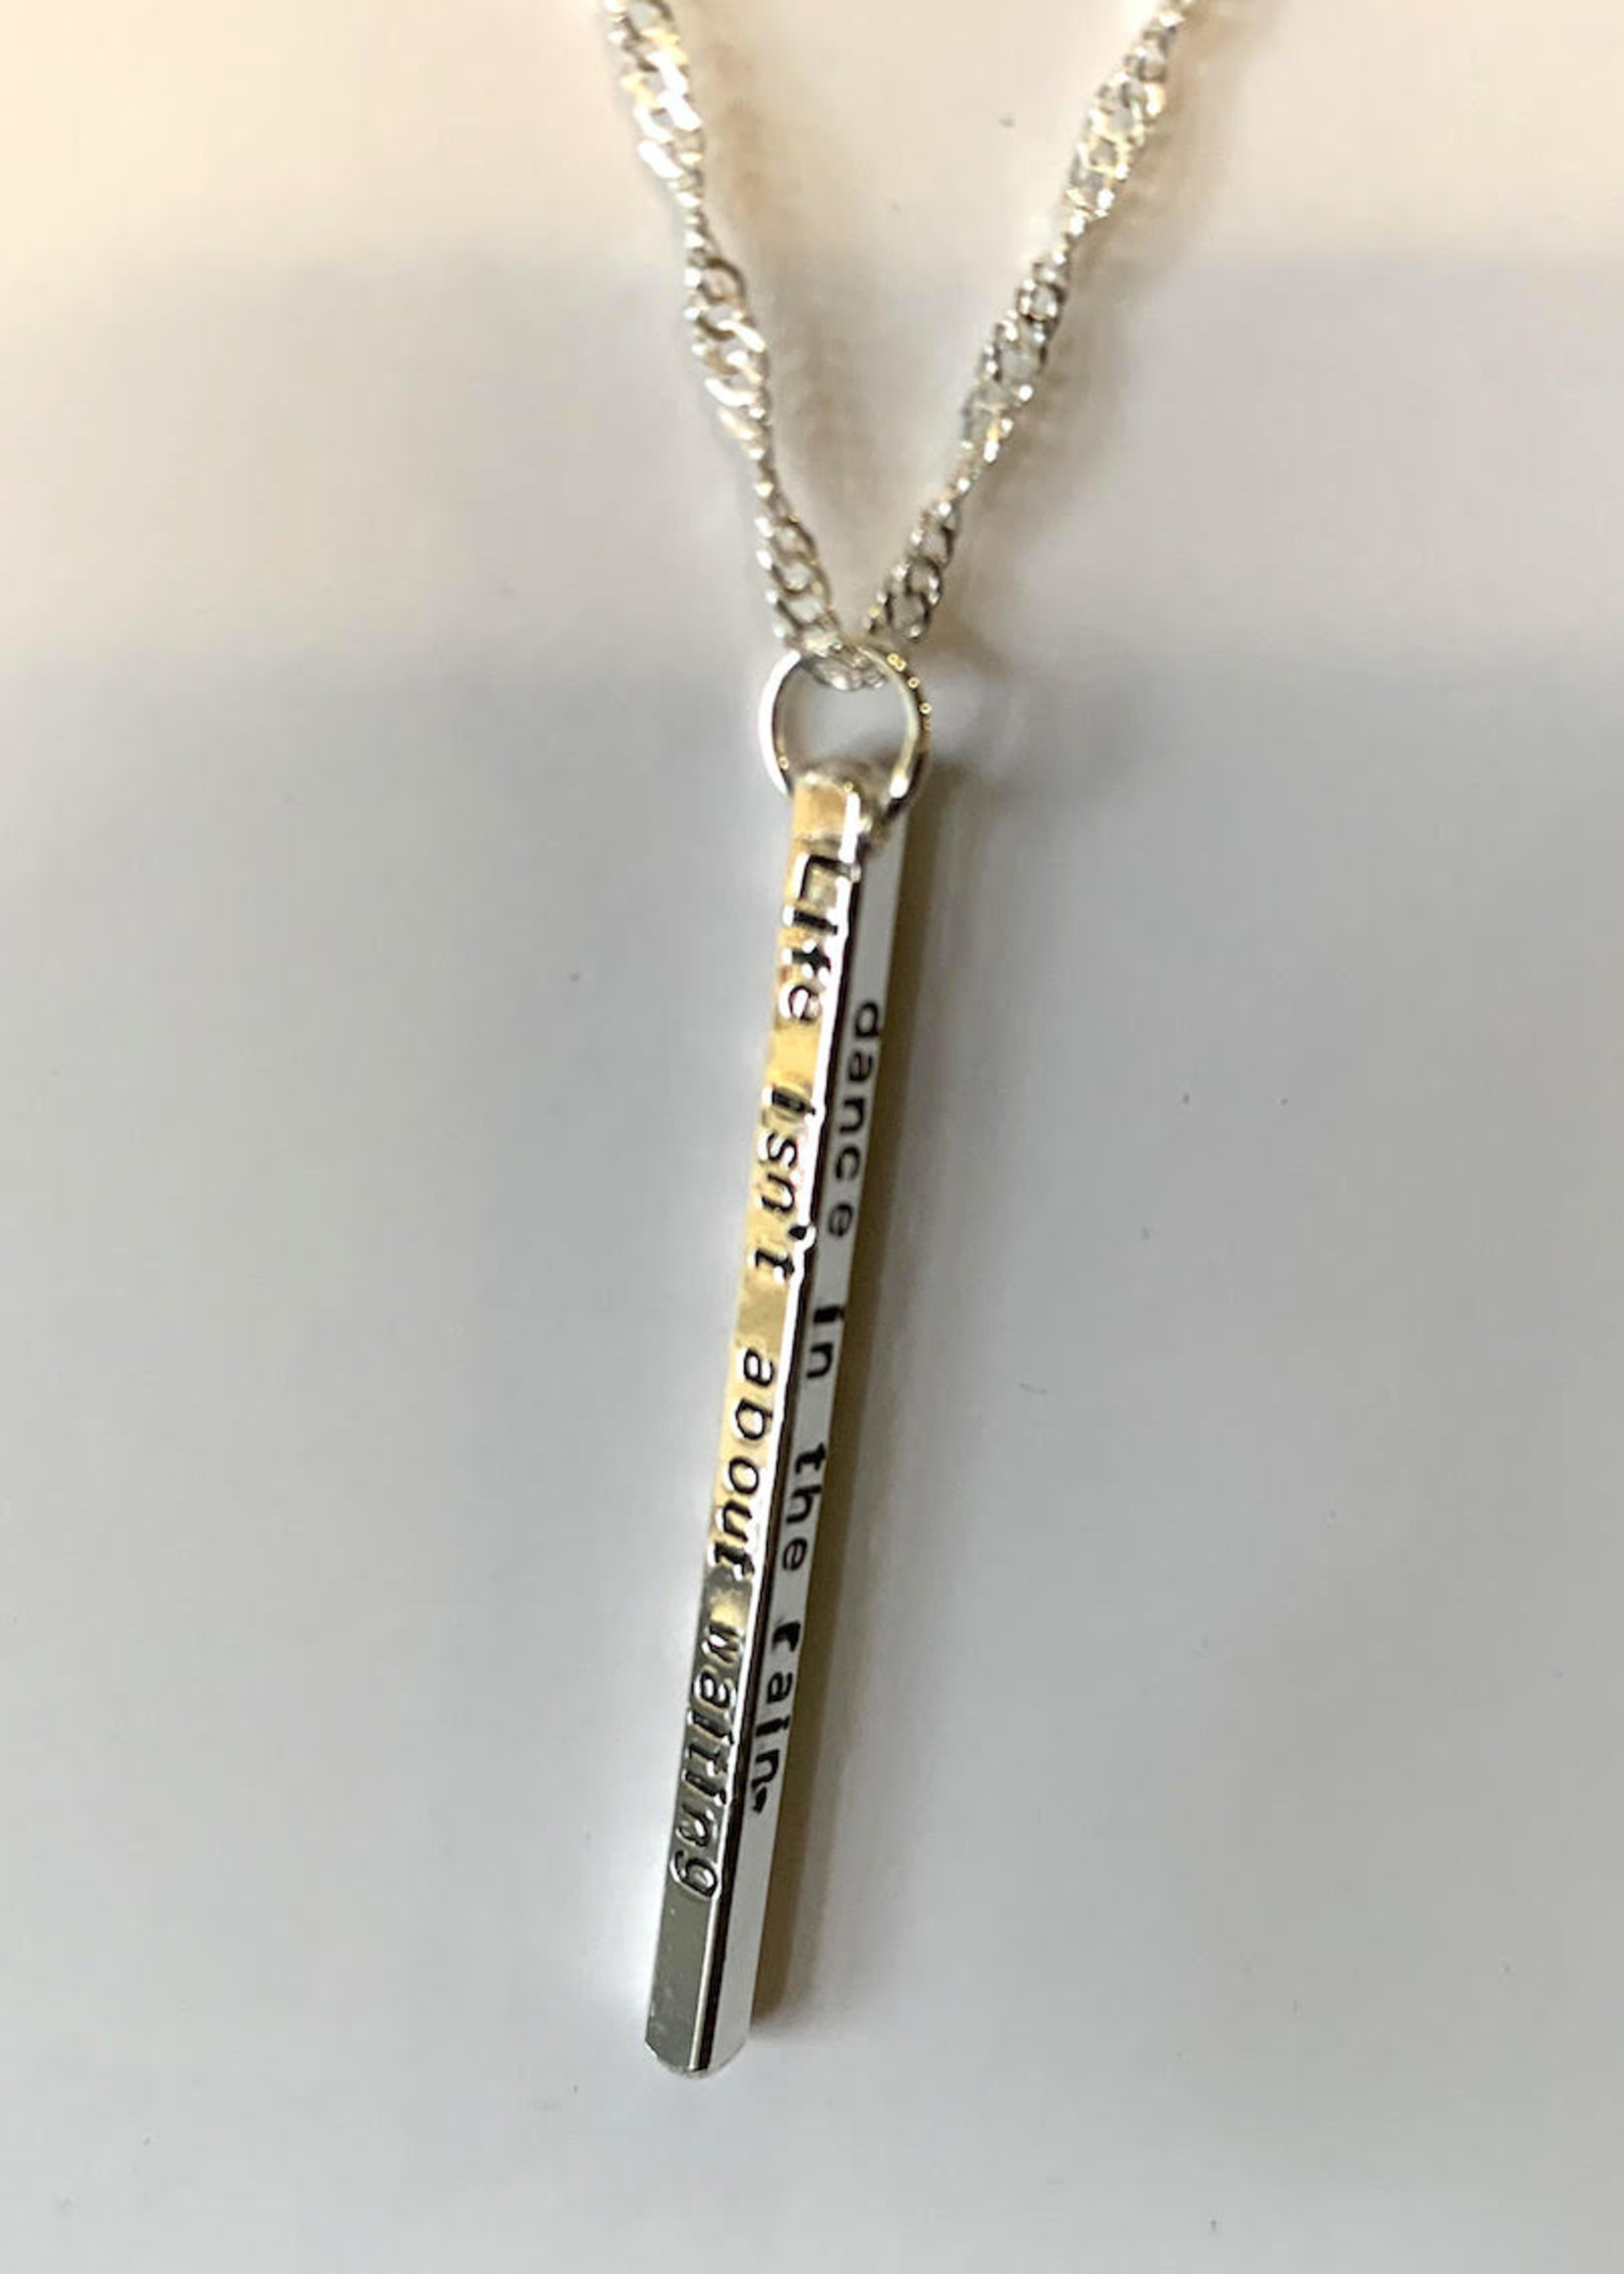 Quote Necklace: "Dance in the rain"